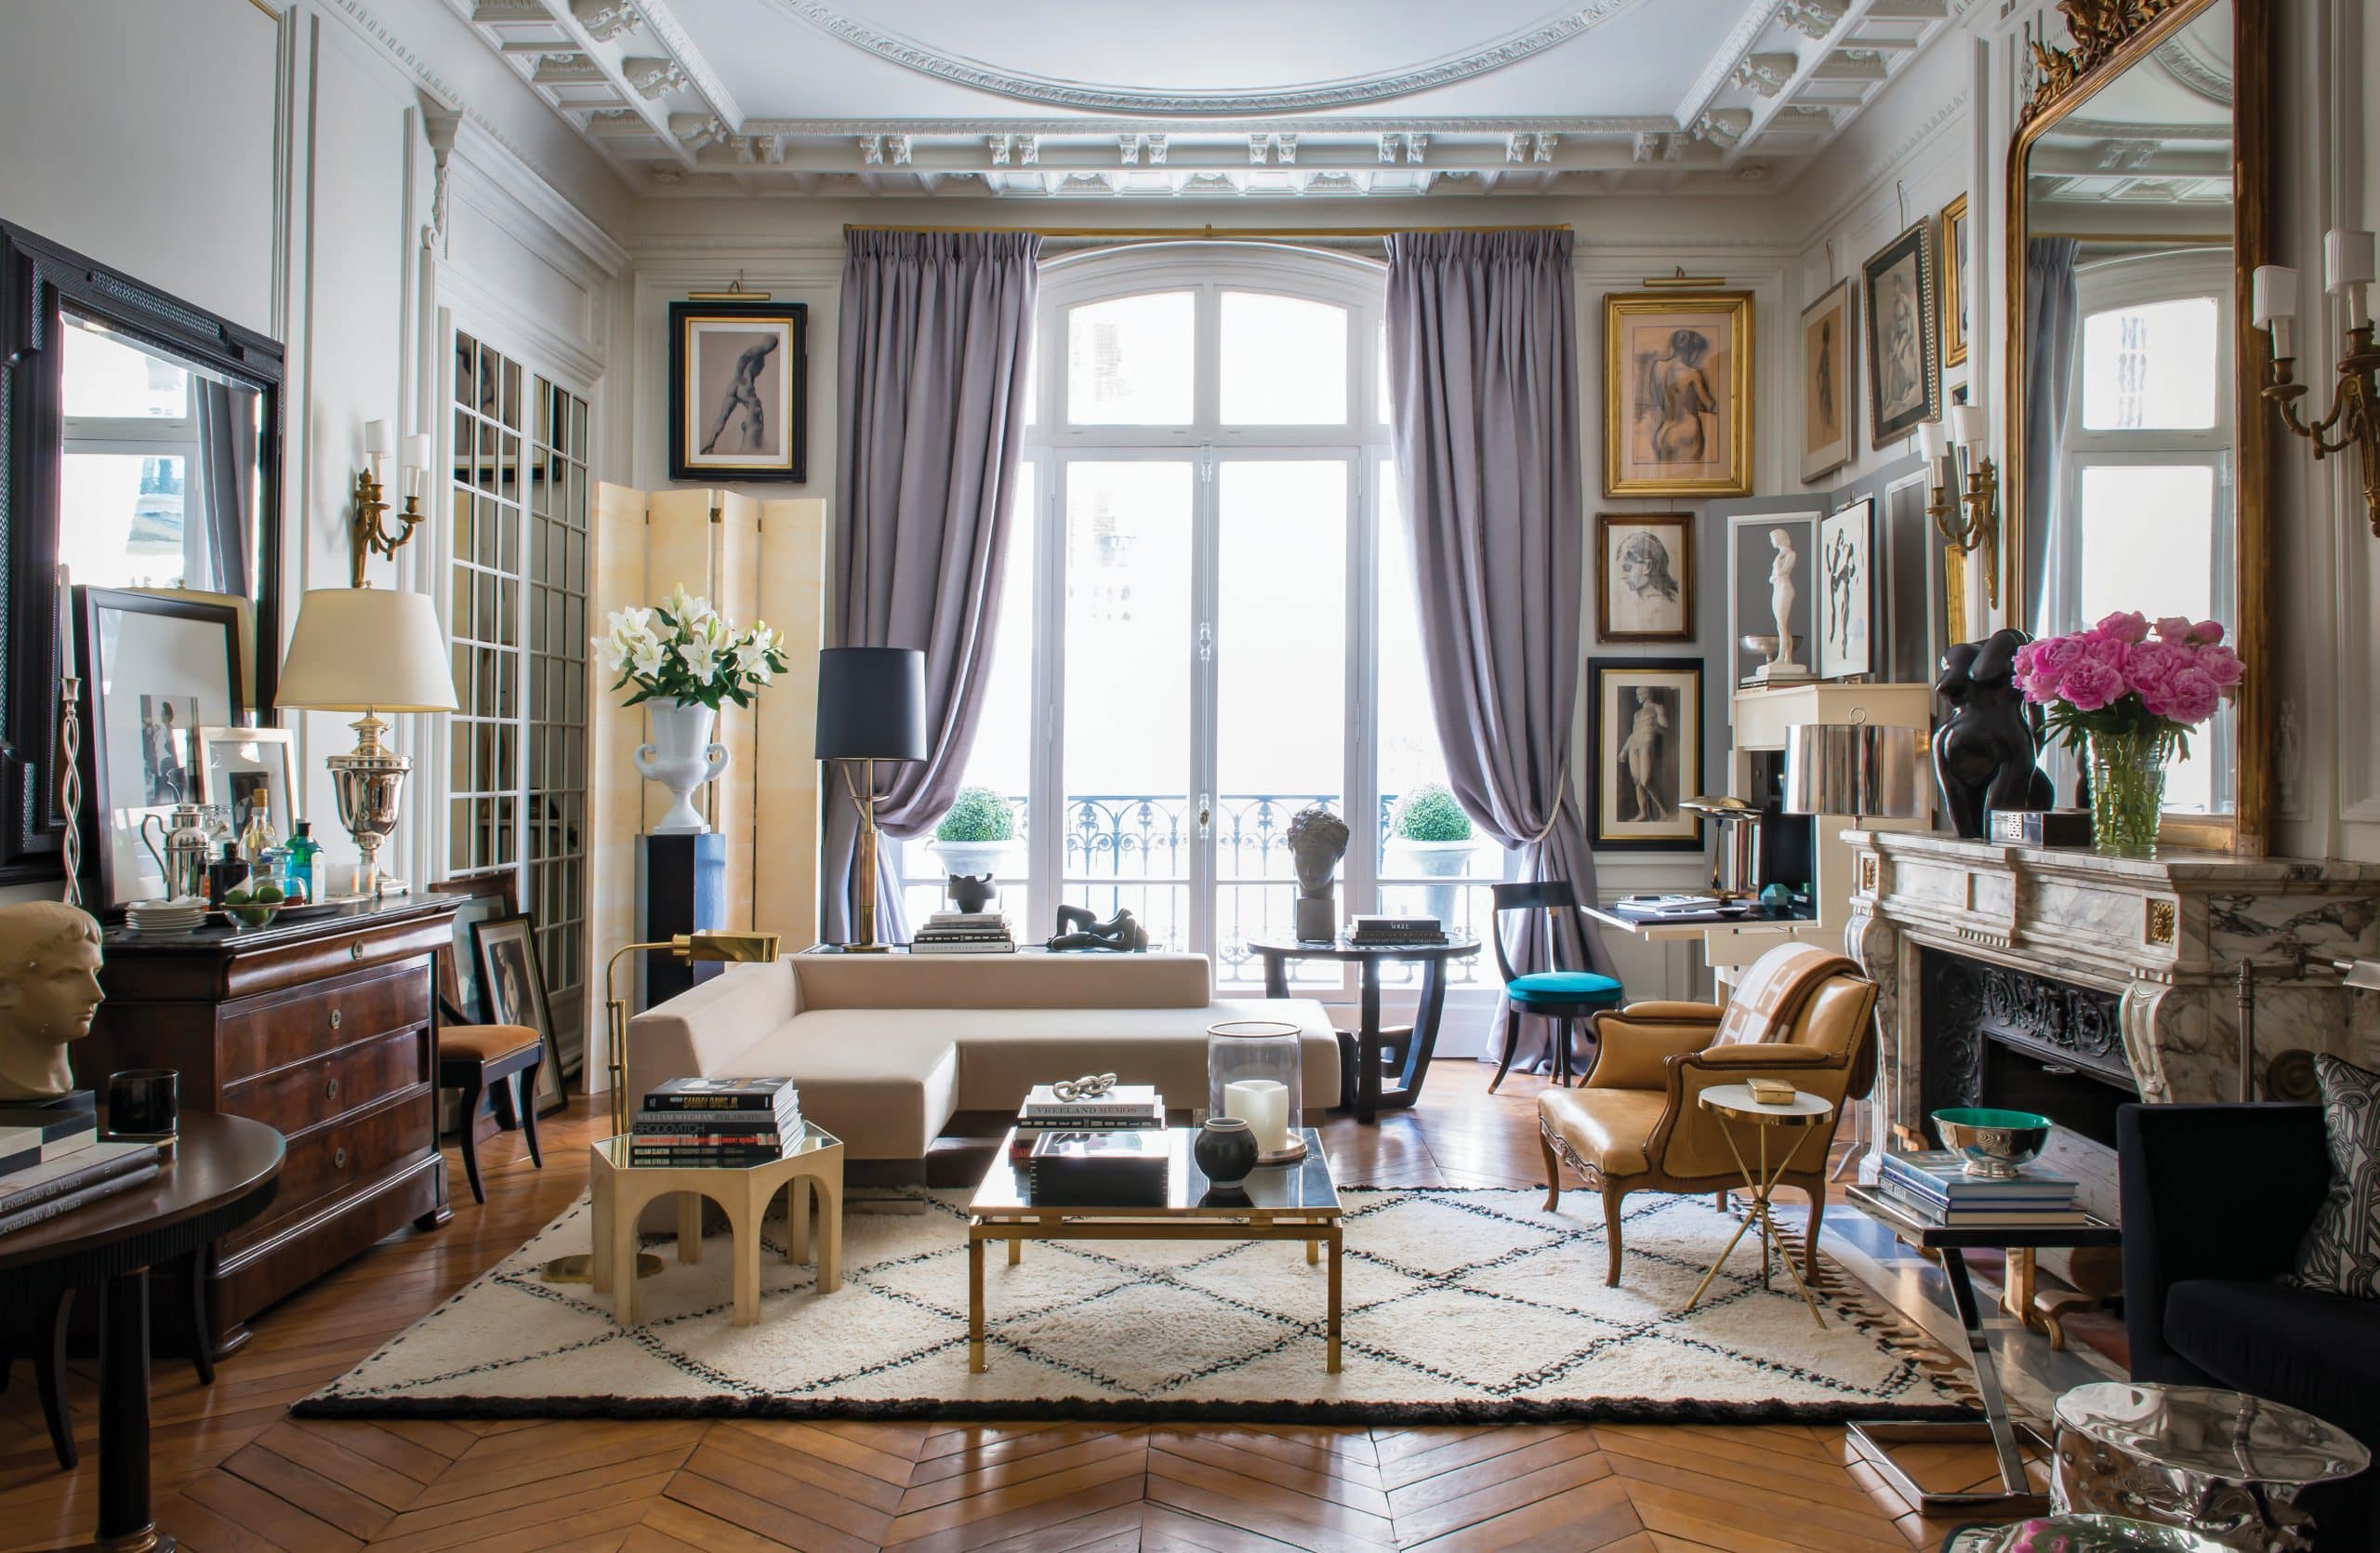 Interior designer David Jimenez living room of his former home on Paris's avenue Marceau from his book Parisian By Design published by Rizzoli 